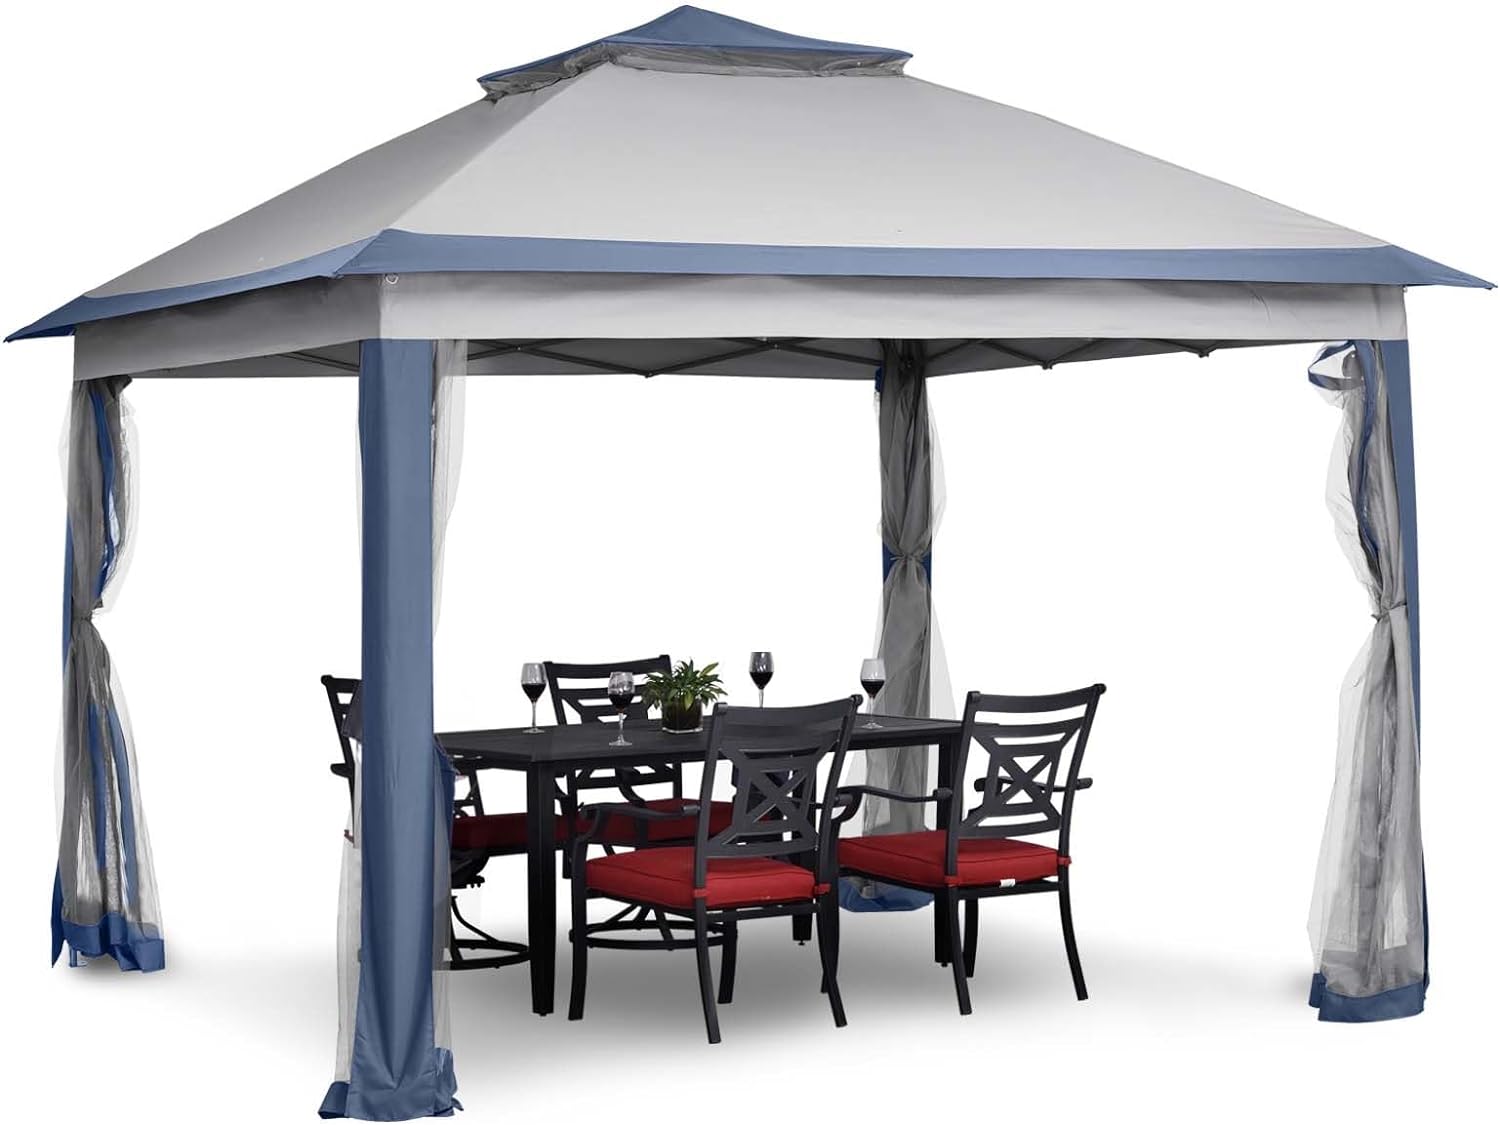 11x11 FT Gazebo Tent, Outdoor Tents for Parties with Mosquito Netting, Heavy Duty Canopy Tent Patio Garden Backyard